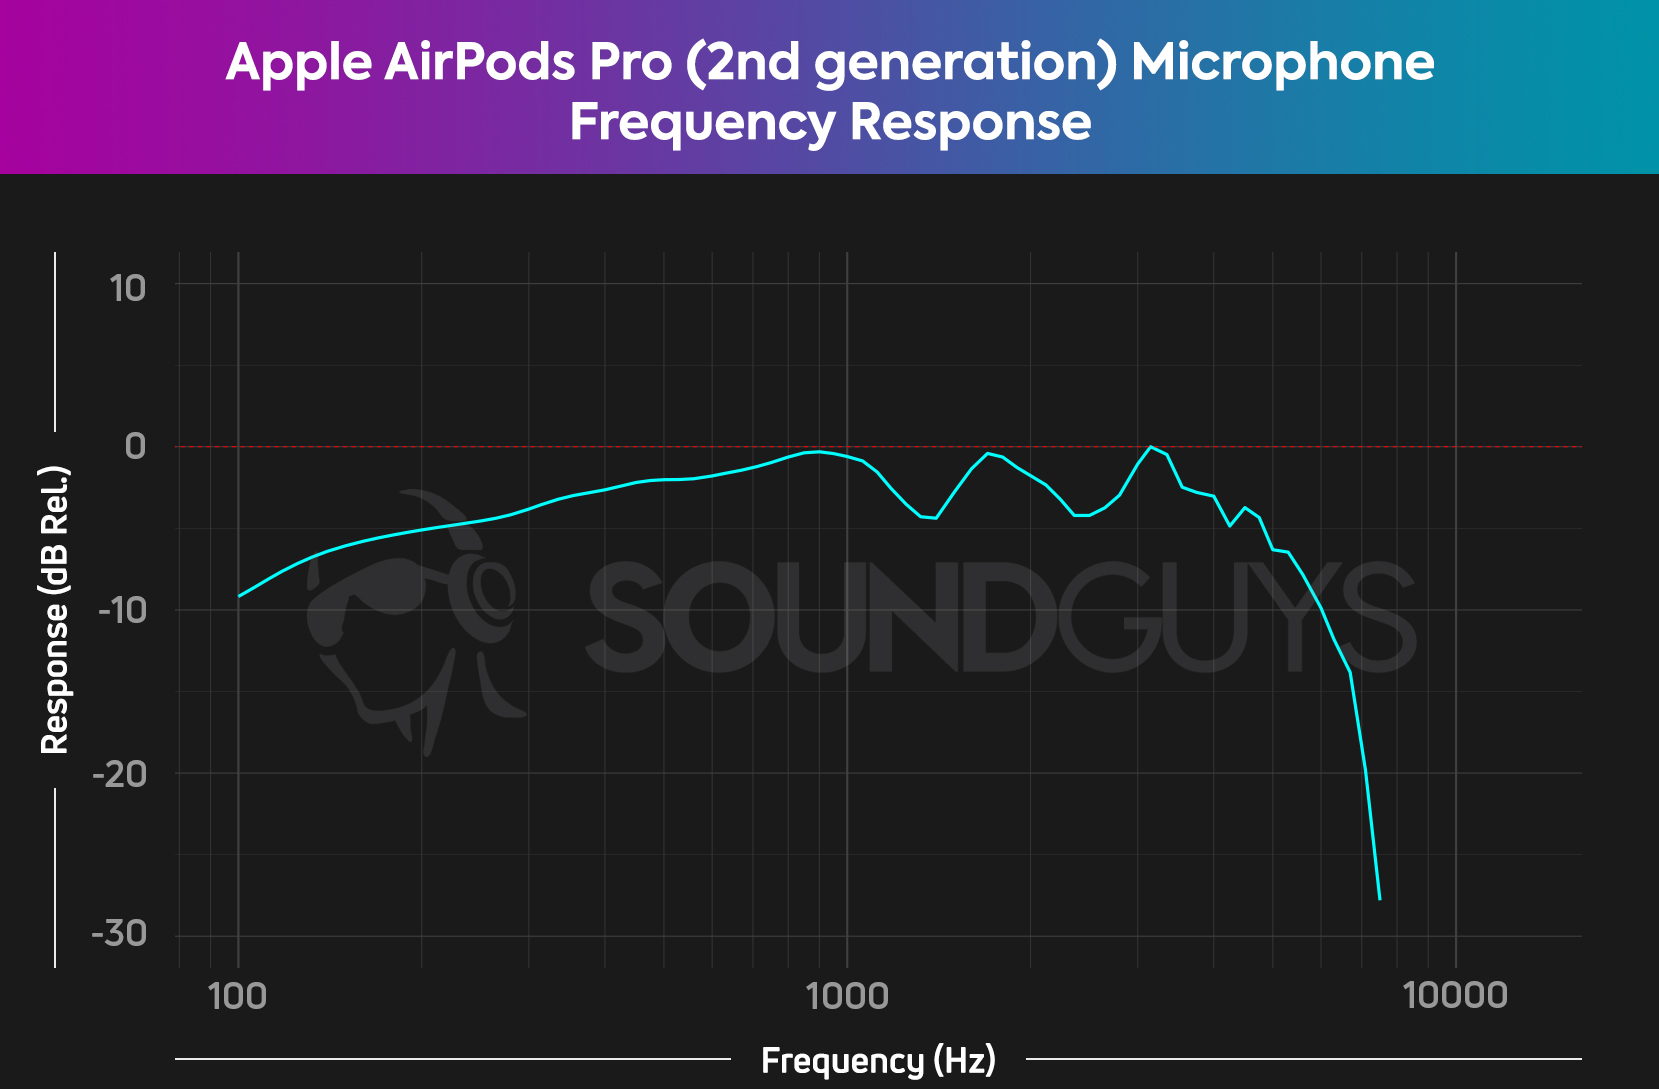 A chart showing the frequency response of the Apple AirPods Pro (2nd generation).